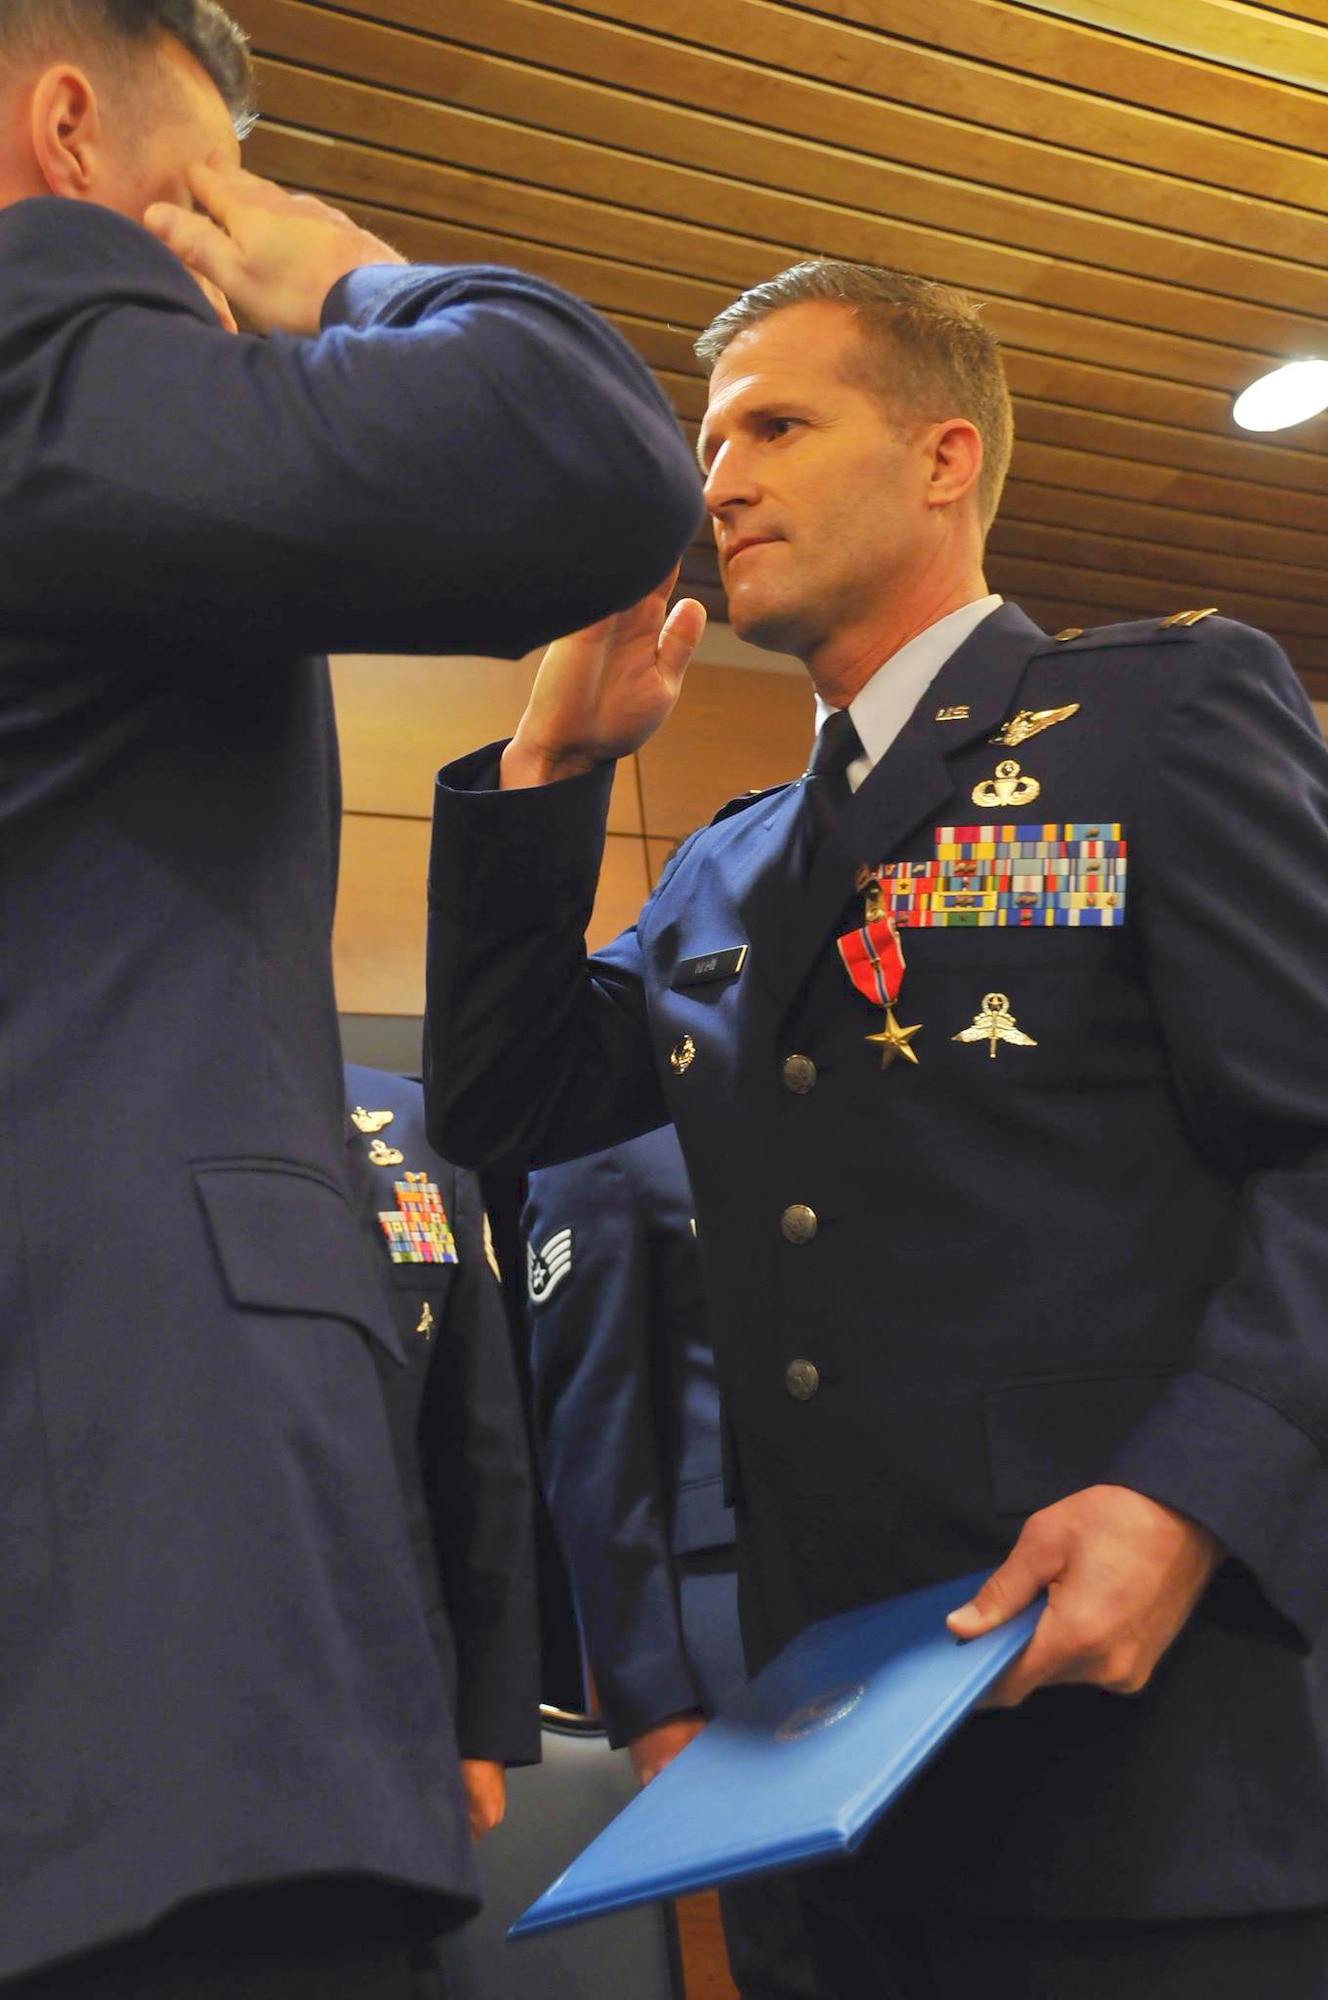 JOINT BASE ELMENDORF-RICHARDSON, Alaska -- Capt. Christopher Keen, a pararescueman from the 212 Rescue Squadron, salutes his commander, Maj. Joseph Conroy, after recieving a Bronze Star Medal. One Silver Star Medal and six Bronze Star Medals were handed out here May 18 to men of valor from the Alaska Air National Guard's 212 Rescue Squadron. The medals were presented for actions from the 212 Rescue Squadron's deployments in 2011 and 2012.  National Guard photo by Staff Sgt. N. Alicia Goldberger.